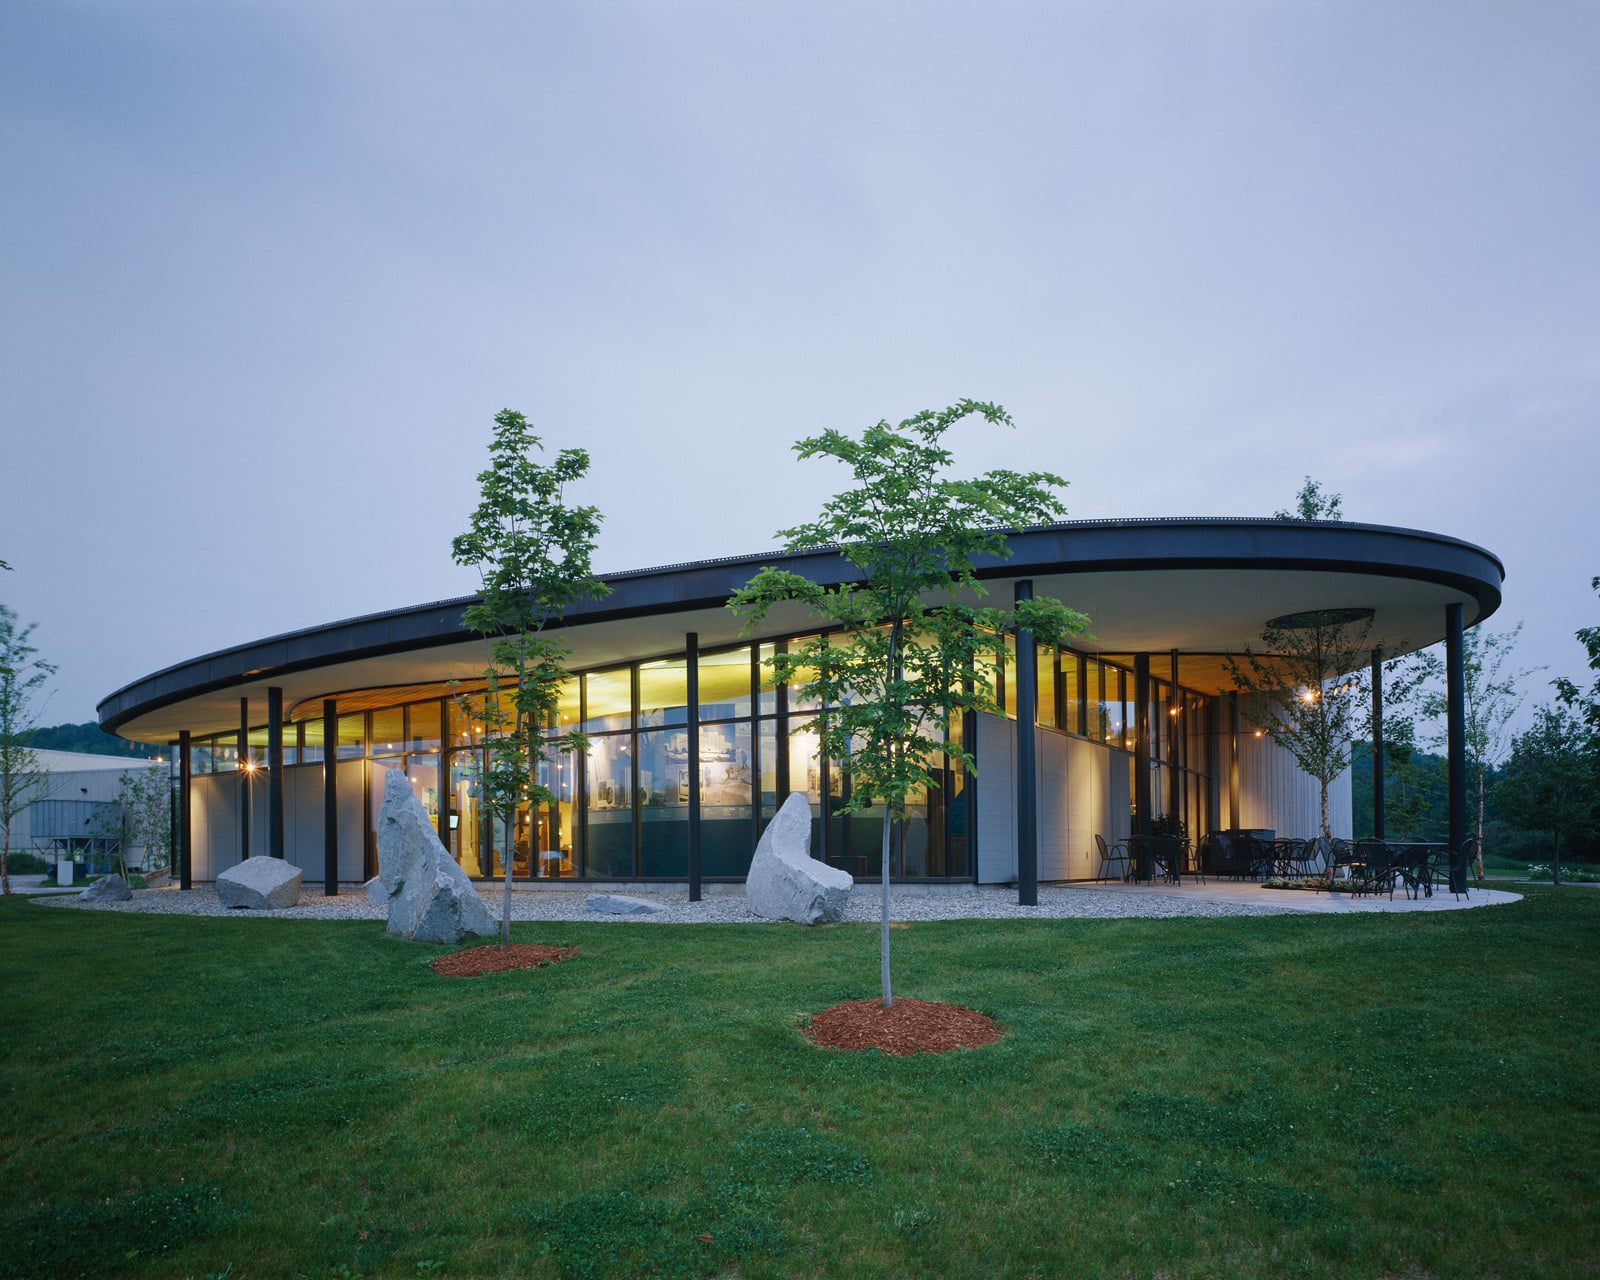 Rock of Ages Visitor Center - Vermont Architects